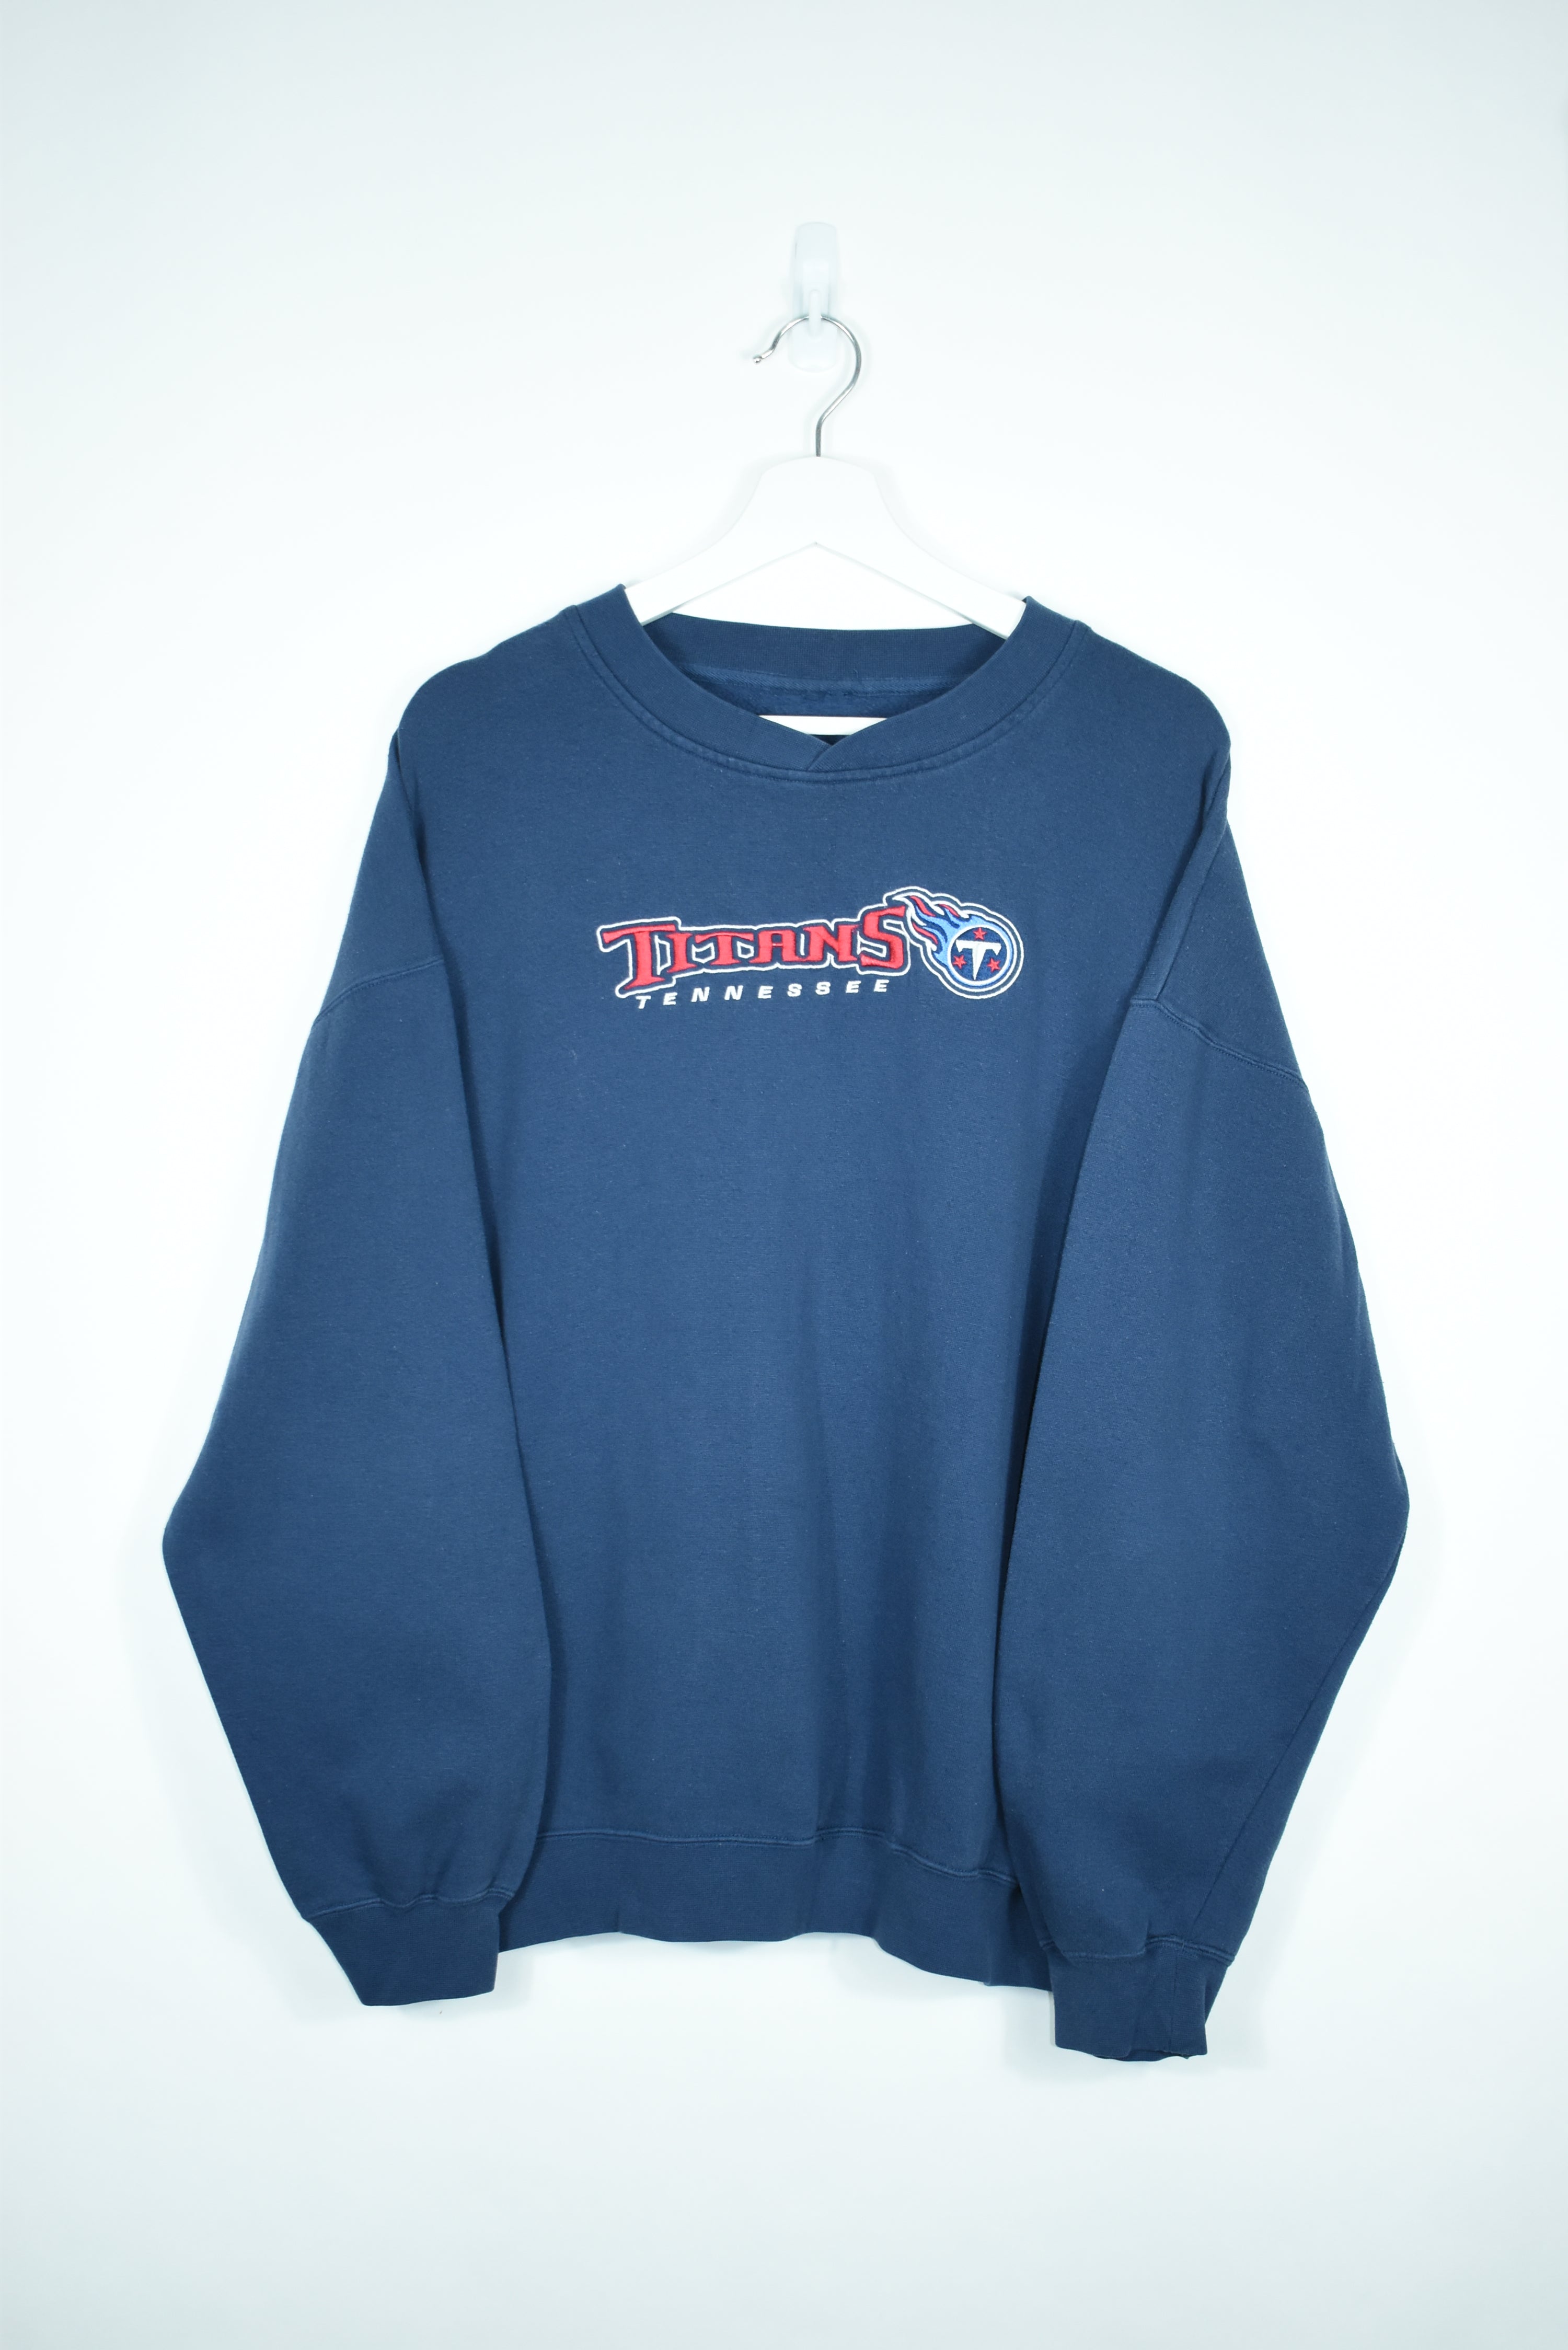 Vintage Tennessee Titans Embroidery Sweatshirt LARGE (Baggy)